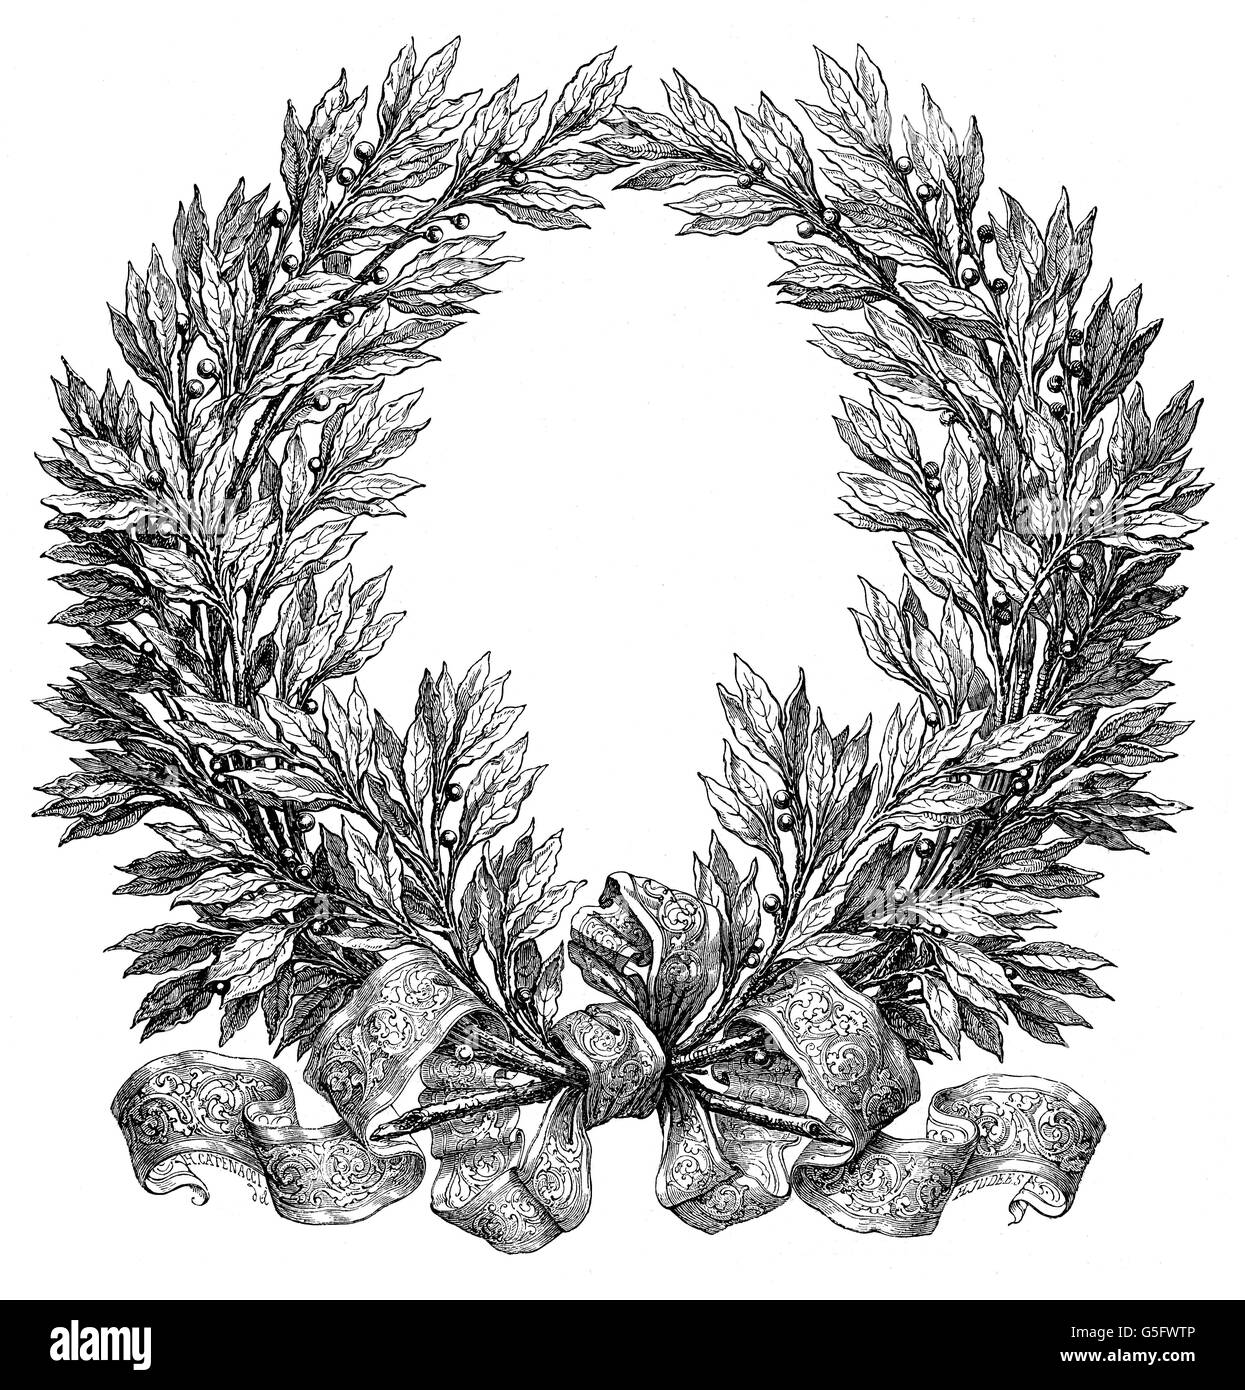 symbols, laurel wreath, wood engraving by Hercule Catenacci, 19th century, laurel, wreath, chaplet, wreaths, chaplets, symbol, symbols, victory, victories, triumph, triumphs, winner, winners, historic, historical, Additional-Rights-Clearences-Not Available Stock Photo